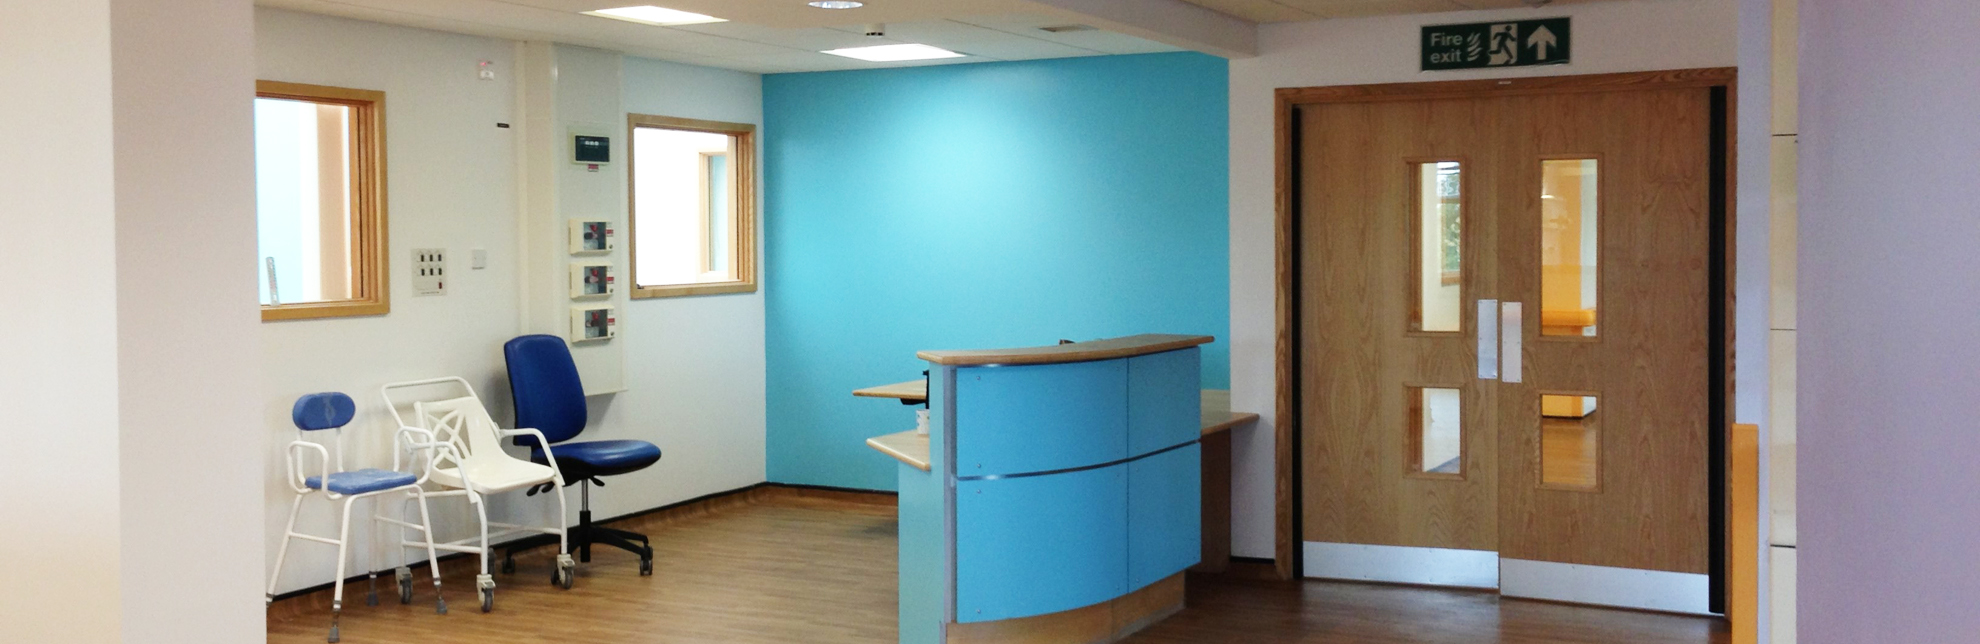 Update your GP Practice treatment rooms to CQC standards